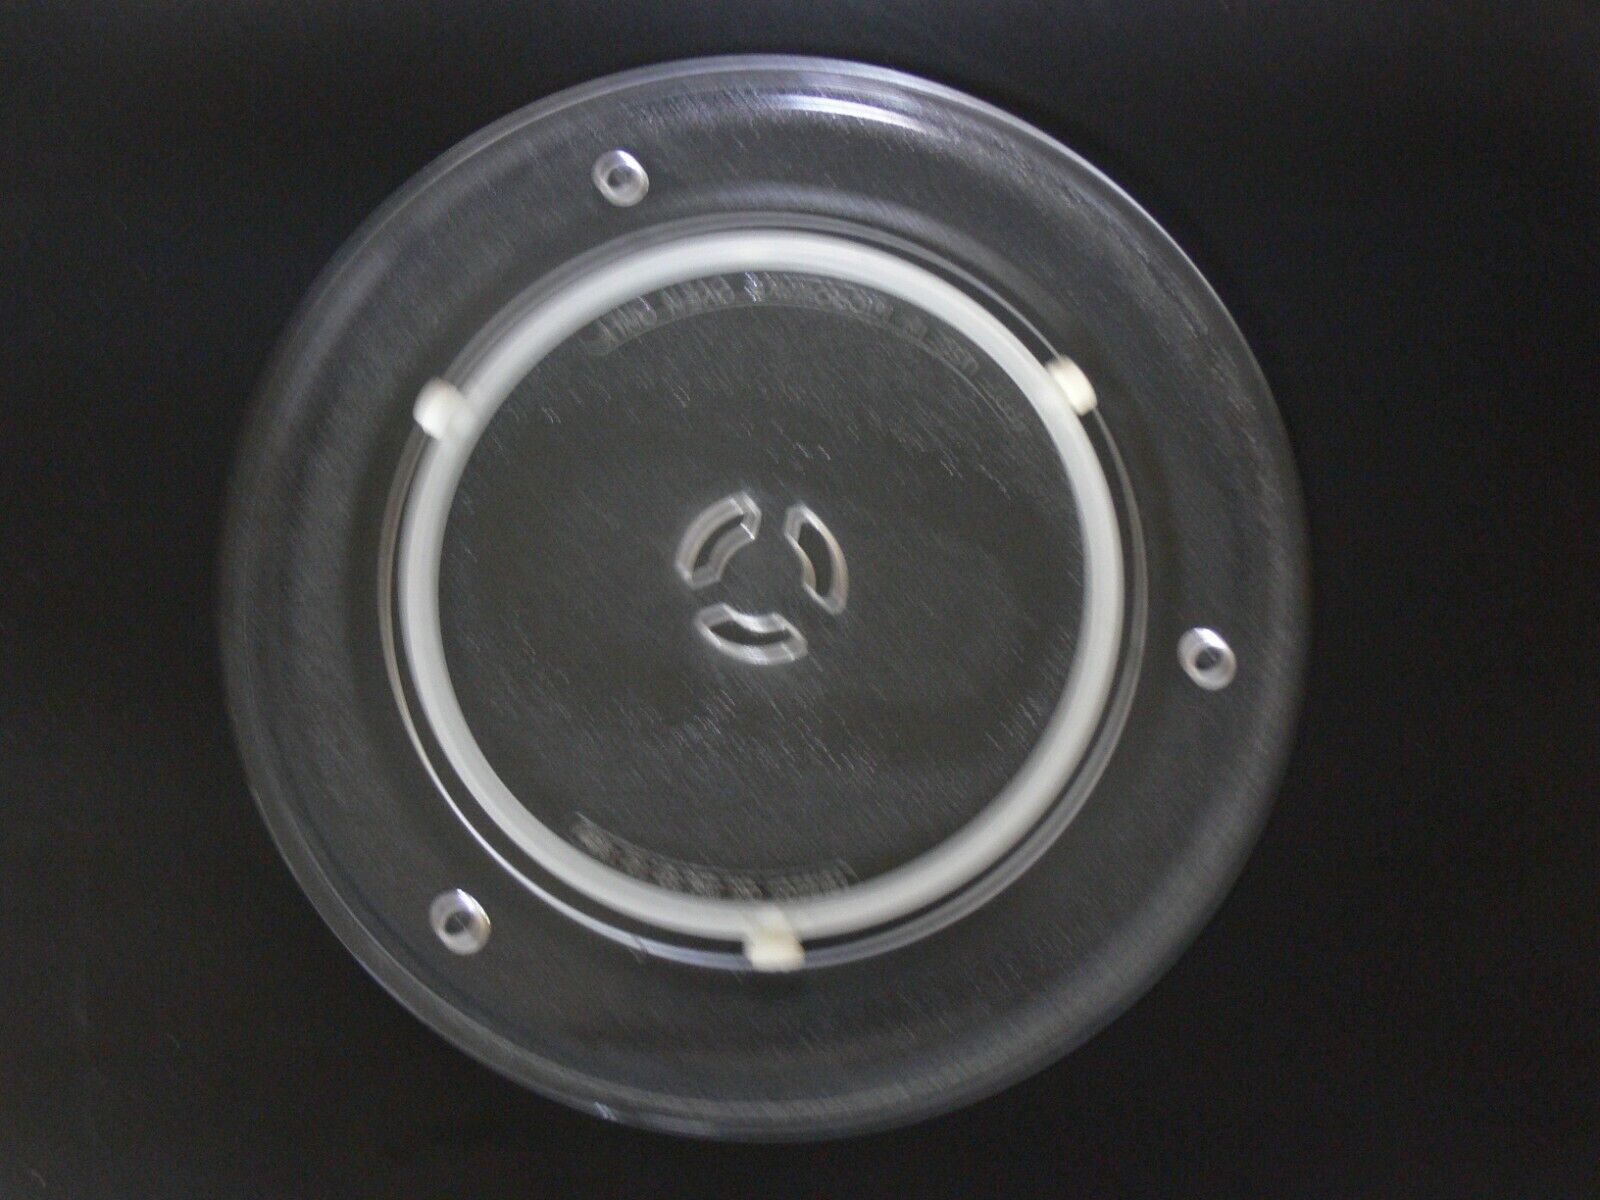 12 7/8" Sharp A051 Microwave Glass Turntable Plate/Tray W/Roller Ring Support! - $78.39